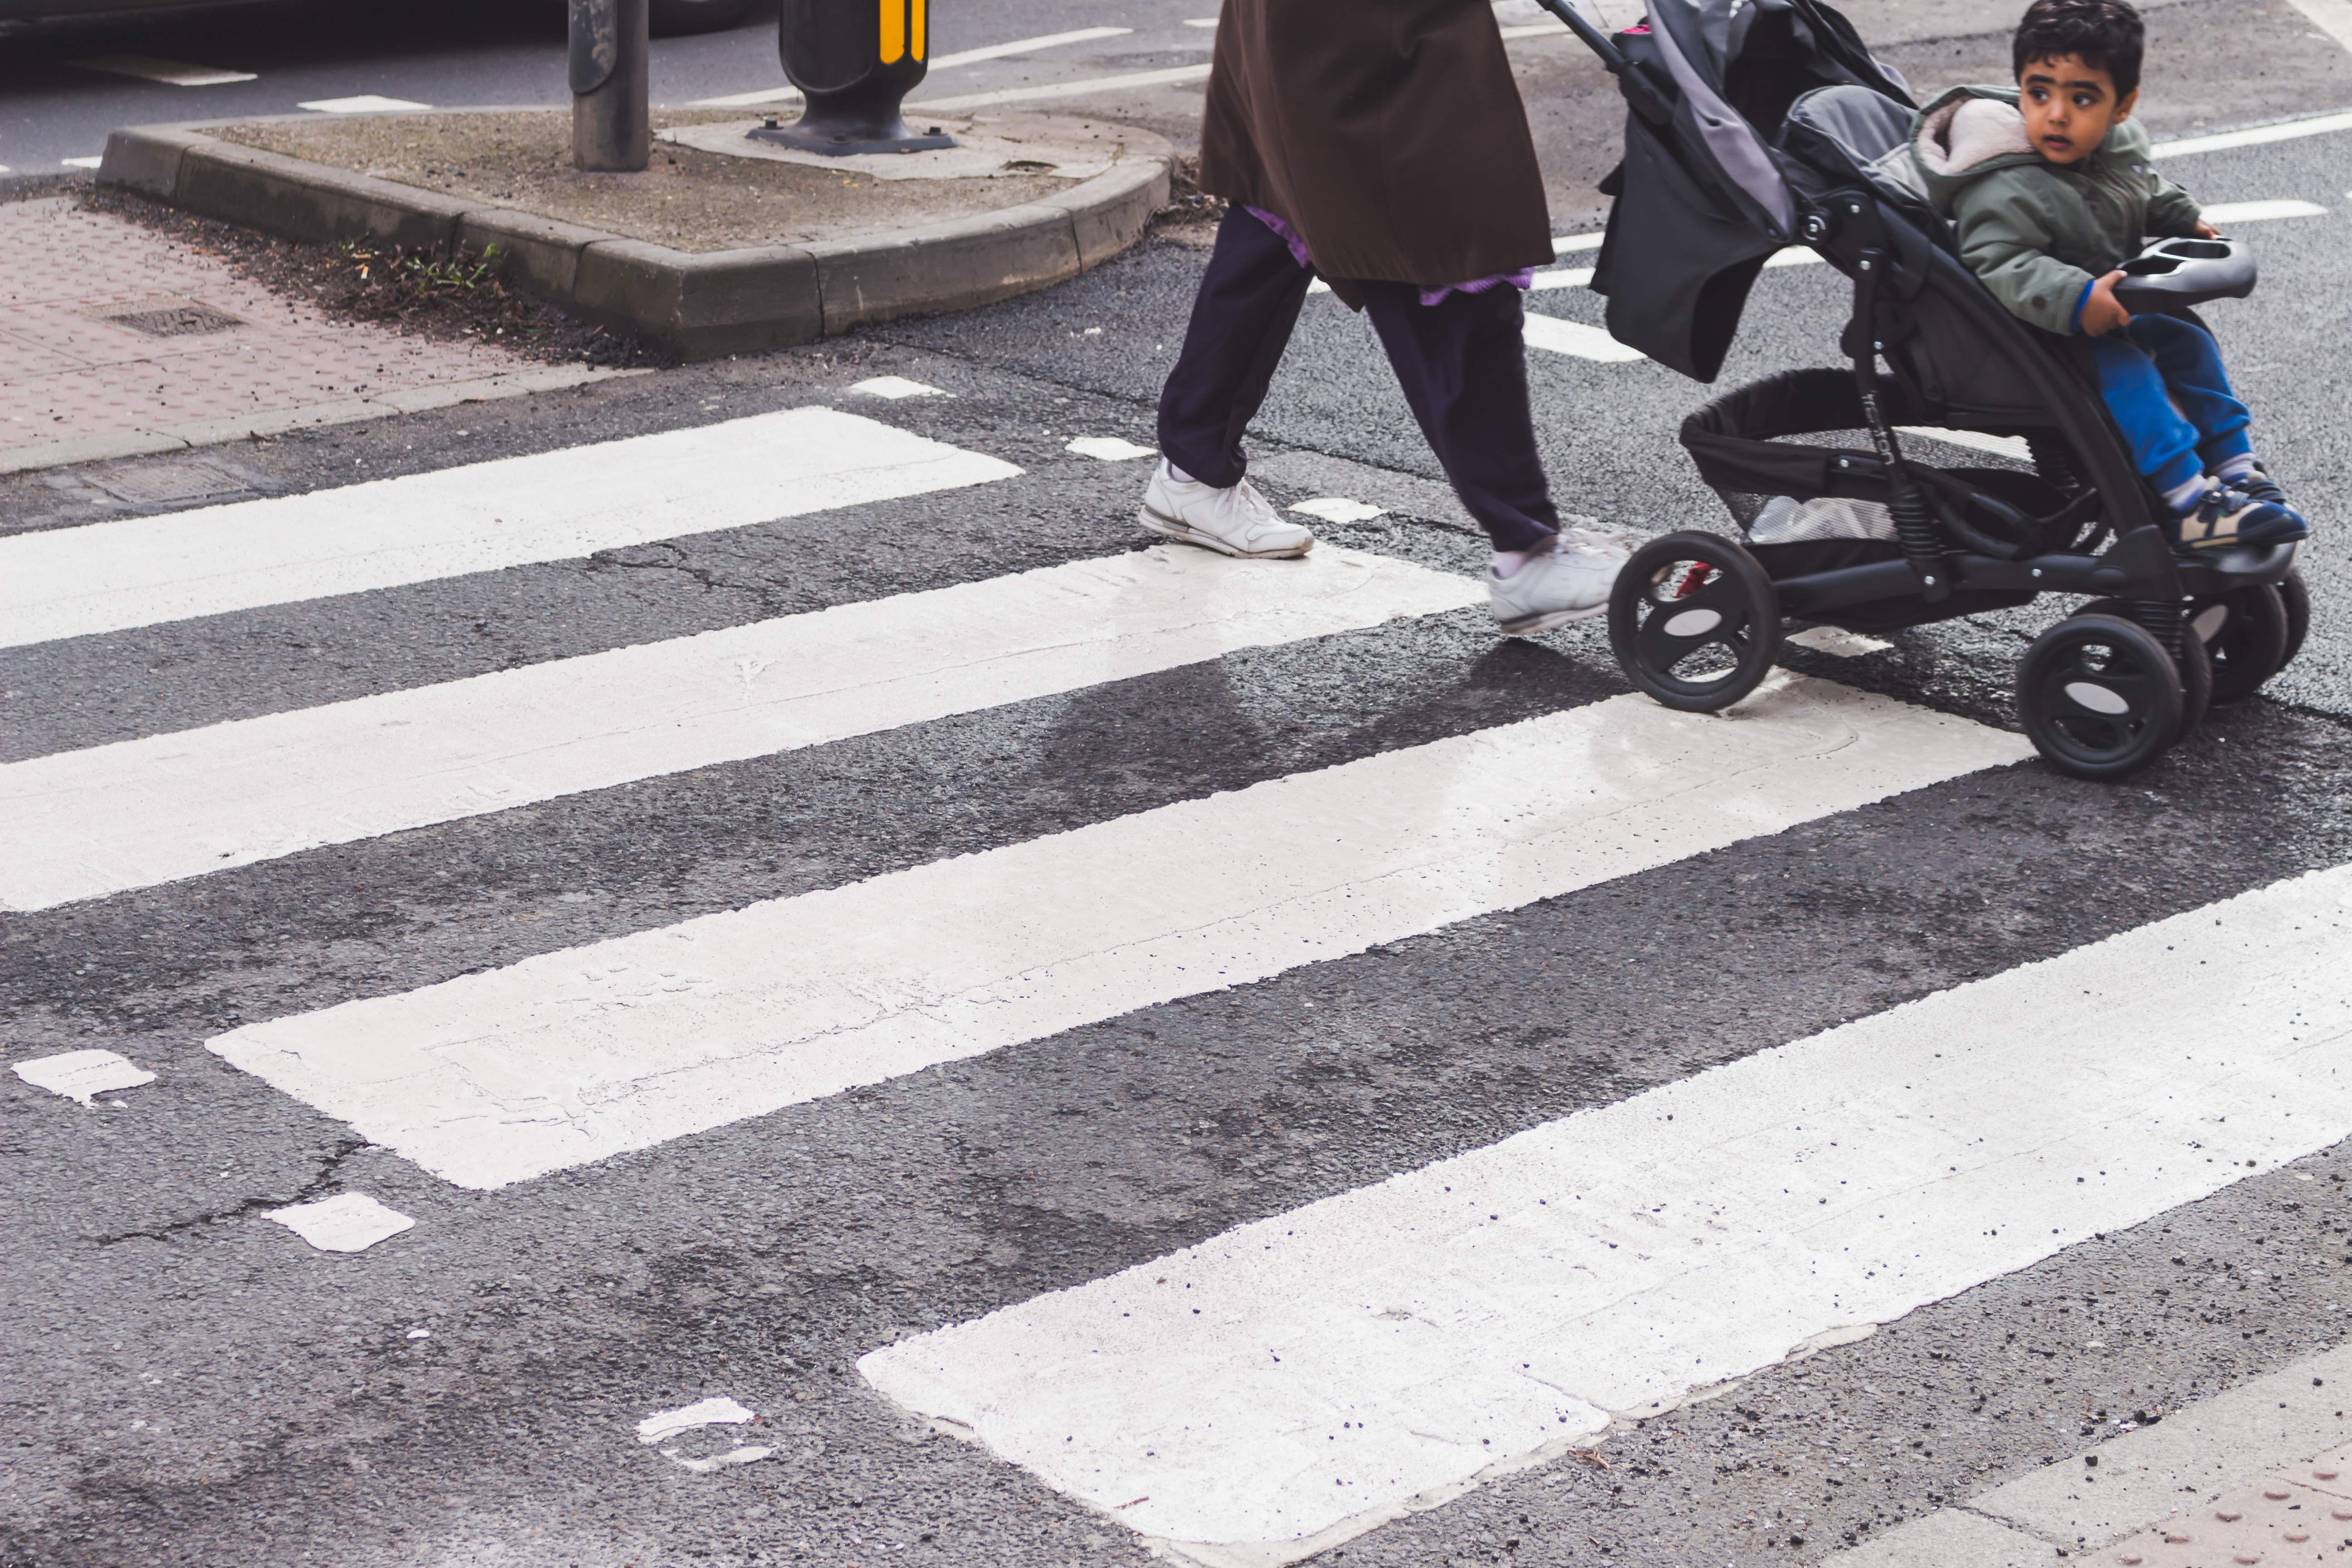 With over 60,000 serious injuries and nearly 4,000 deaths each year, pedestrian accidents are occurring at an alarming rate.